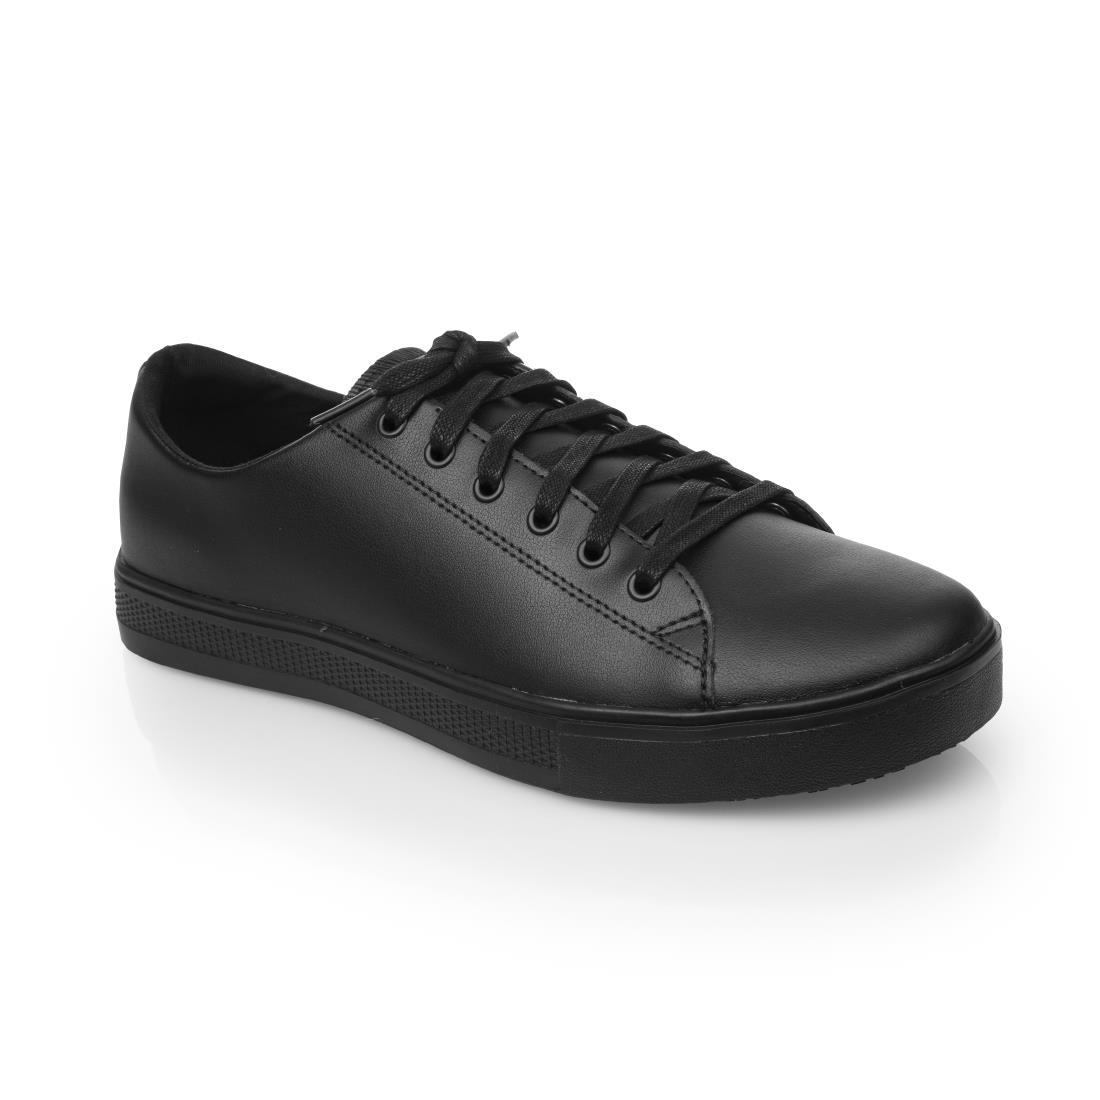 Shoes for Crews Old School Trainers Black 43 - BB161-43  - 1